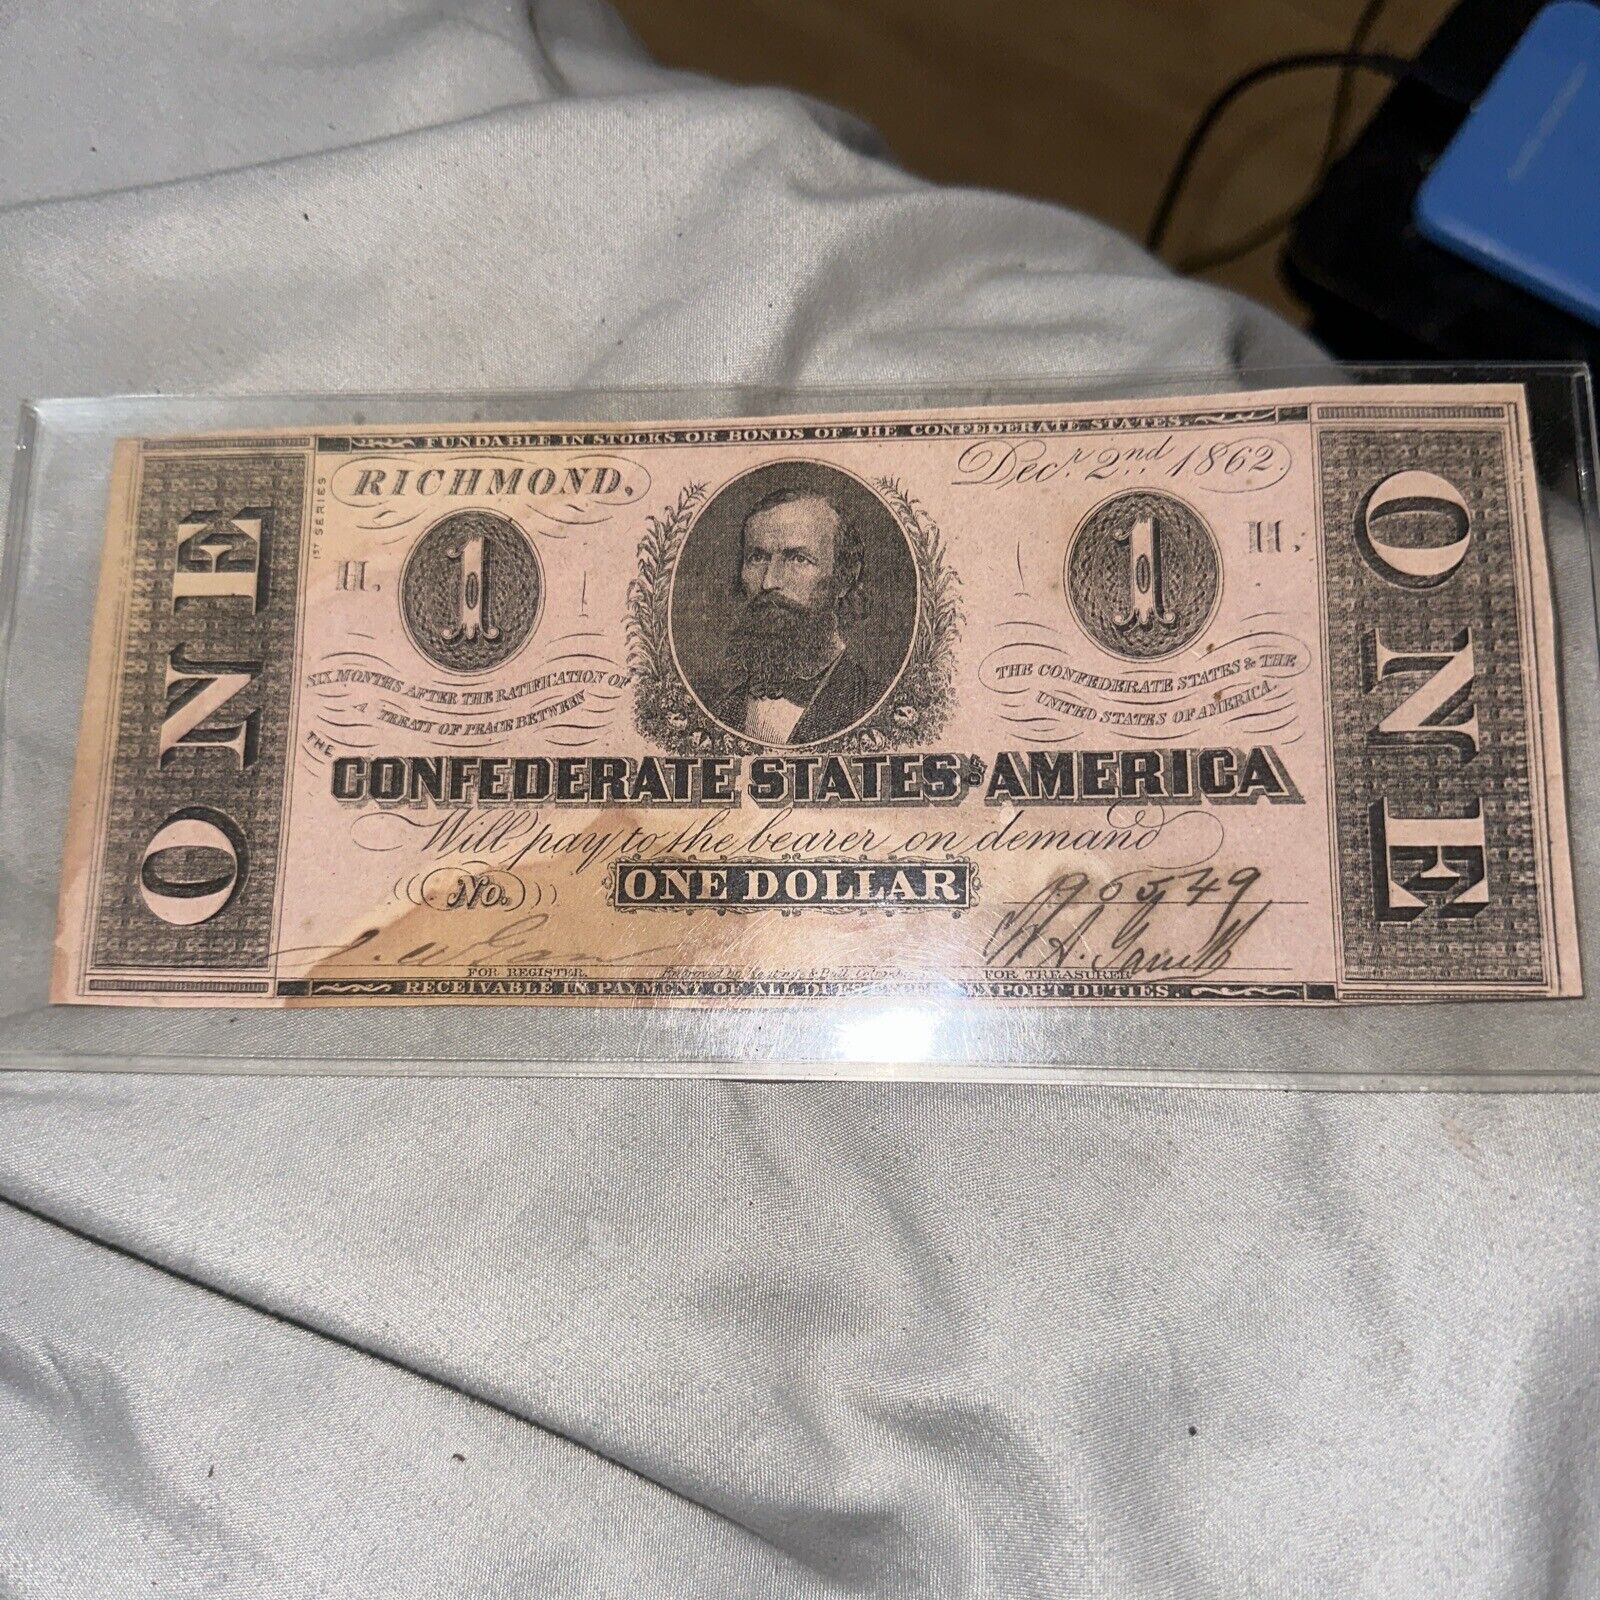 T-55 1862 $1 ONE DOLLAR CSA CONFEDERATE STATES OF AMERICA CURRENCY NOTE (C)